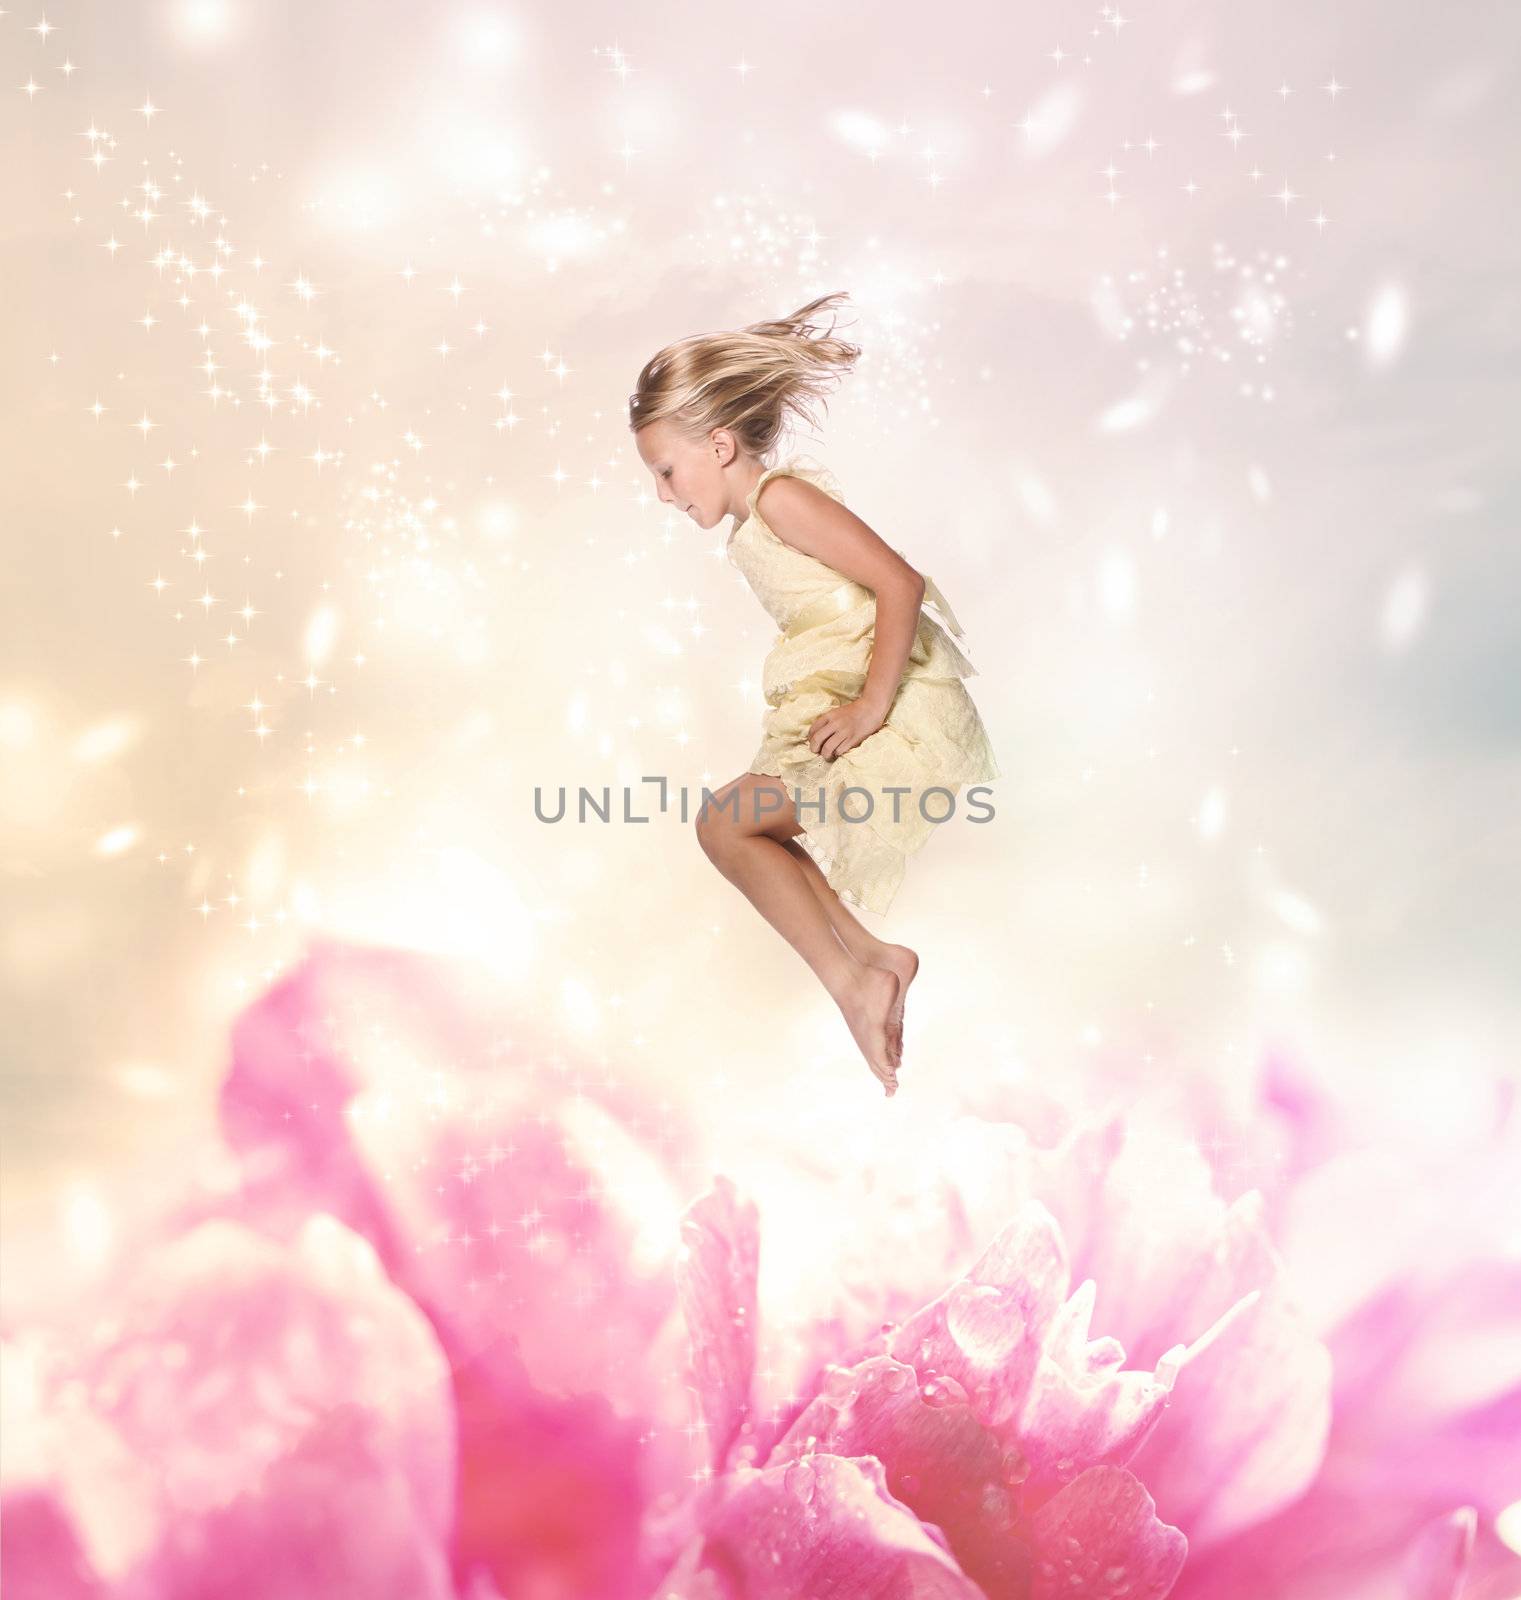 Blond Girl Jumping into a Giant Flower